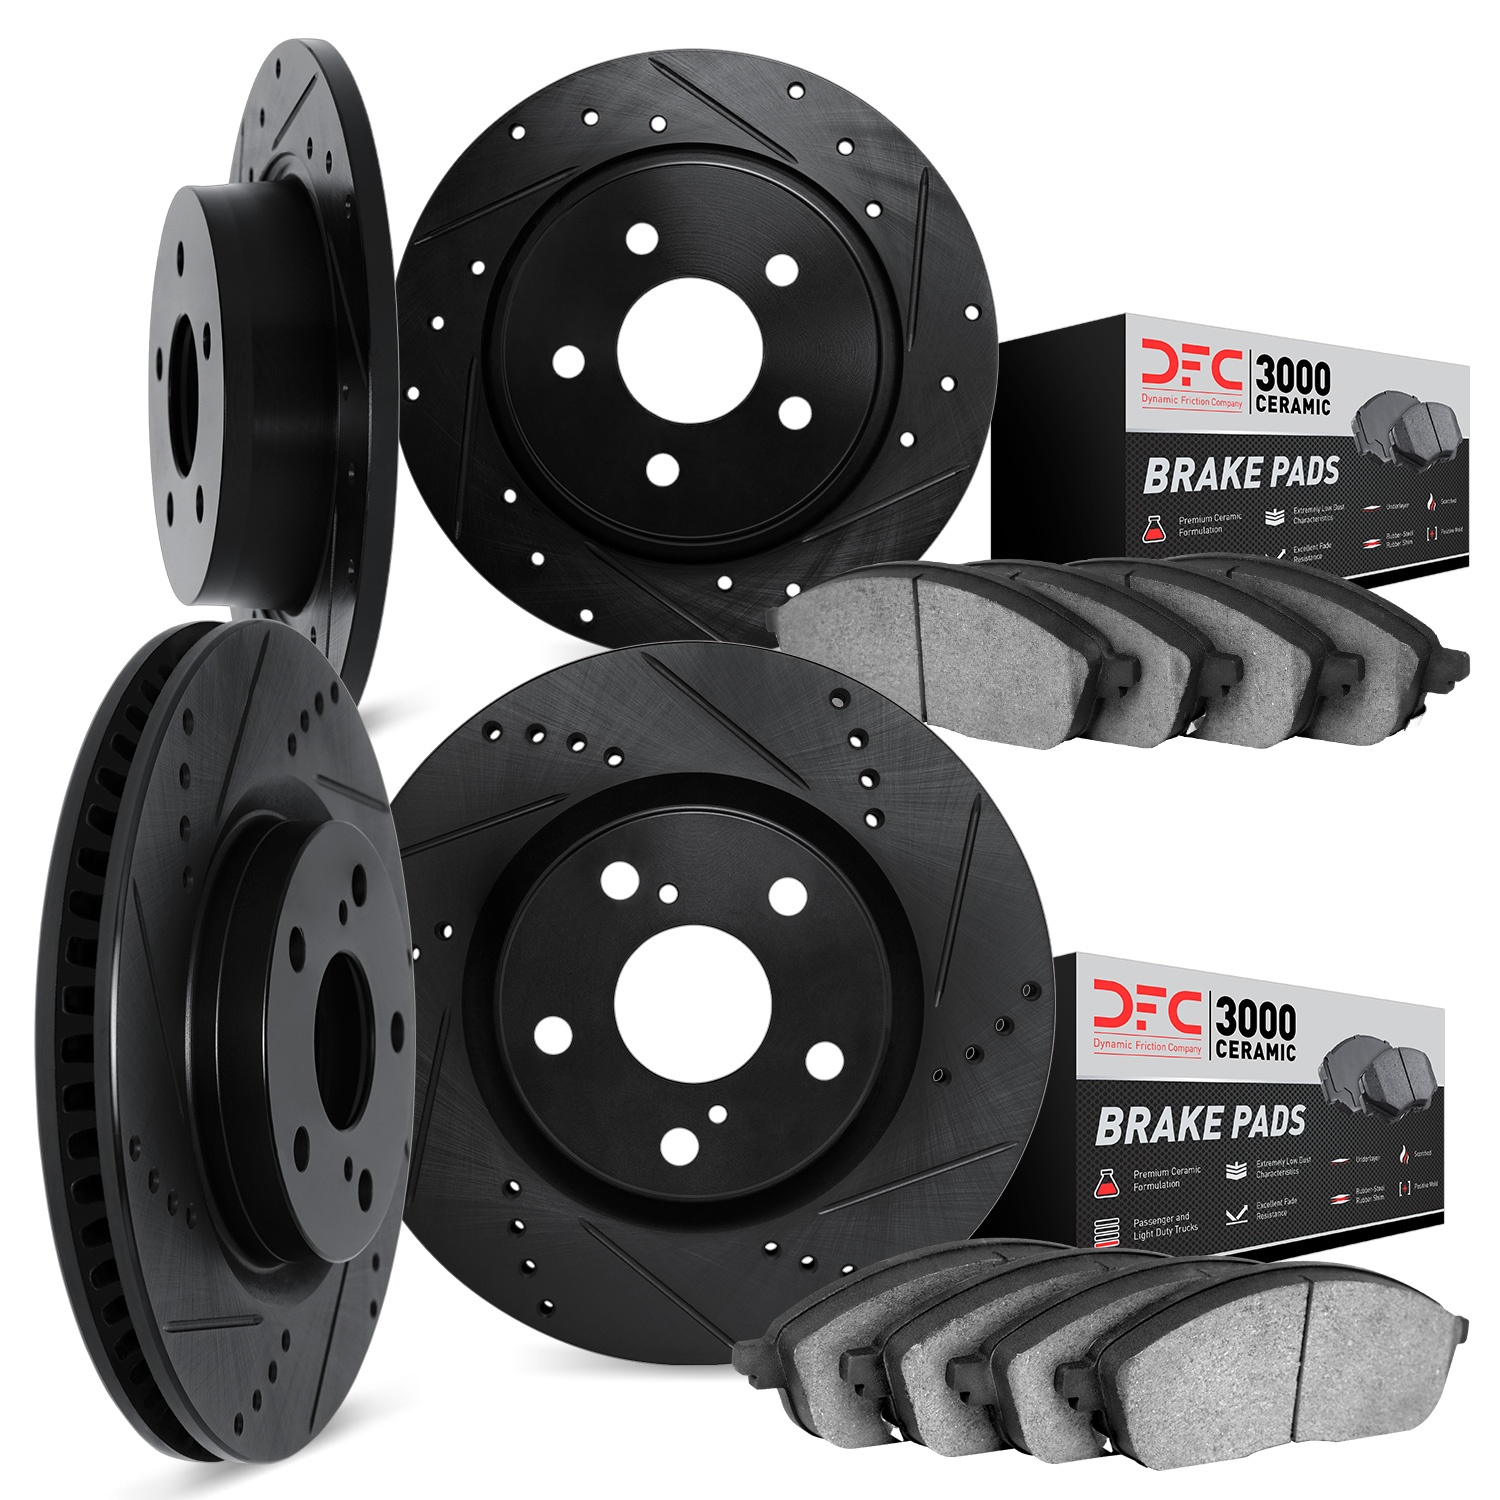 8304-59039 Drilled/Slotted Brake Rotors with 3000-Series Ceramic Brake Pads Kit [Black], 2013-2015 Acura/Honda, Position: Front